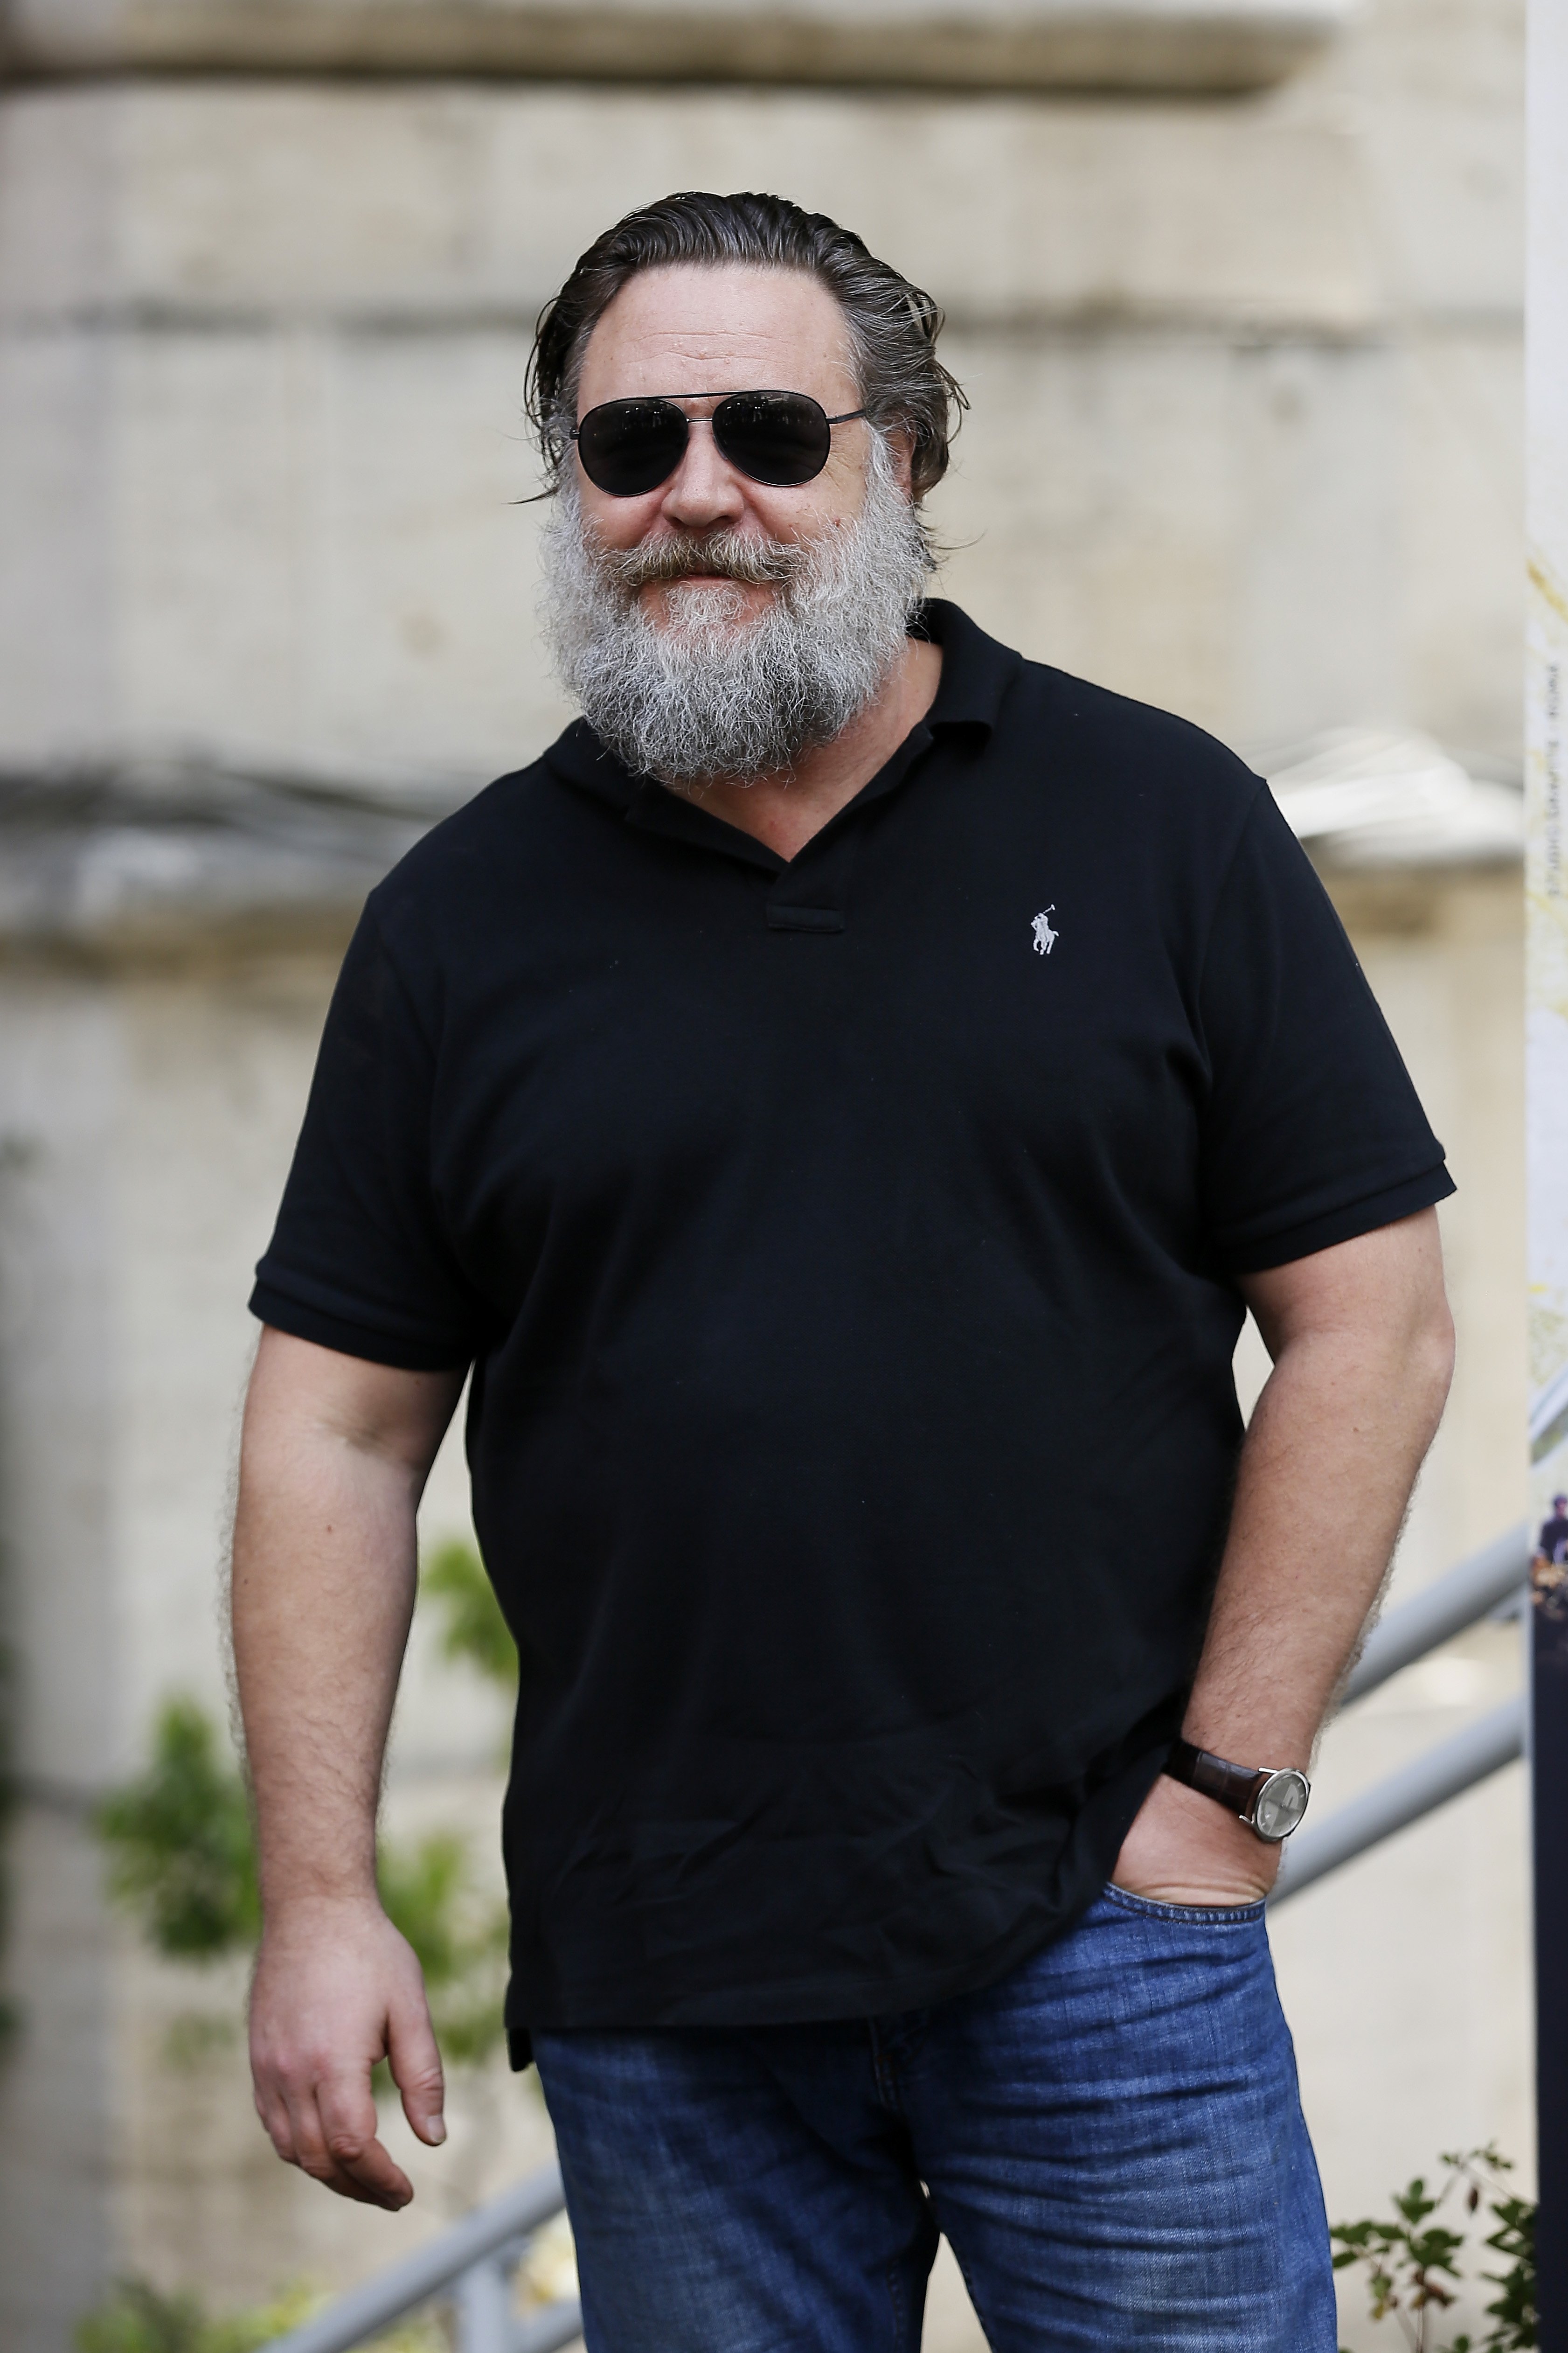 Russell Crowe attends the 'Il Gladiatore In Concerto' presentation at Teatro Euclide on June 5, 2018, in Rome, Italy. | Source: Getty Images